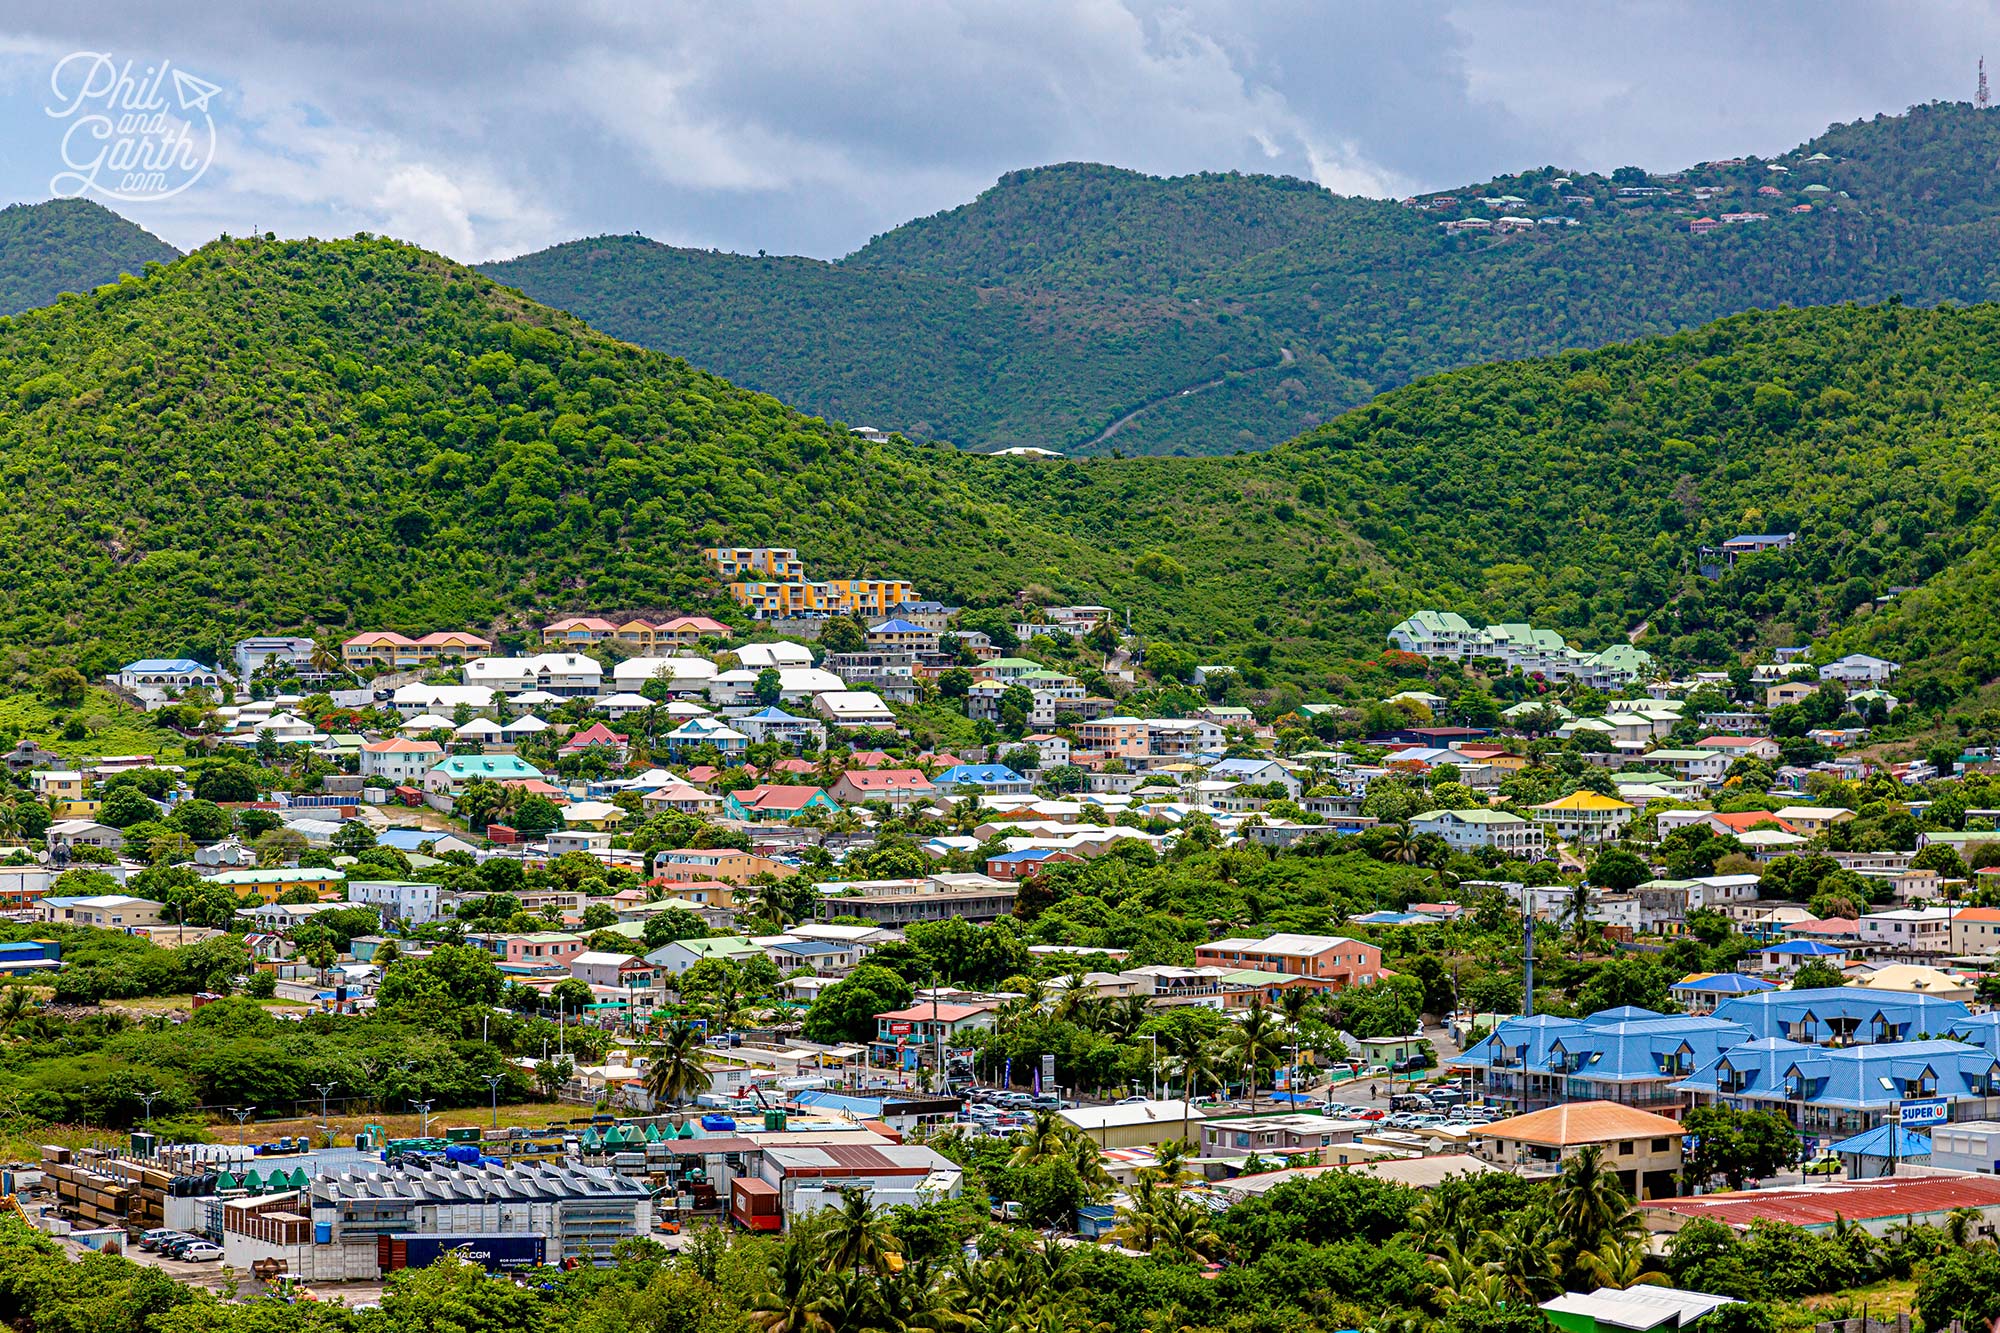 St Martin is a lush and green island